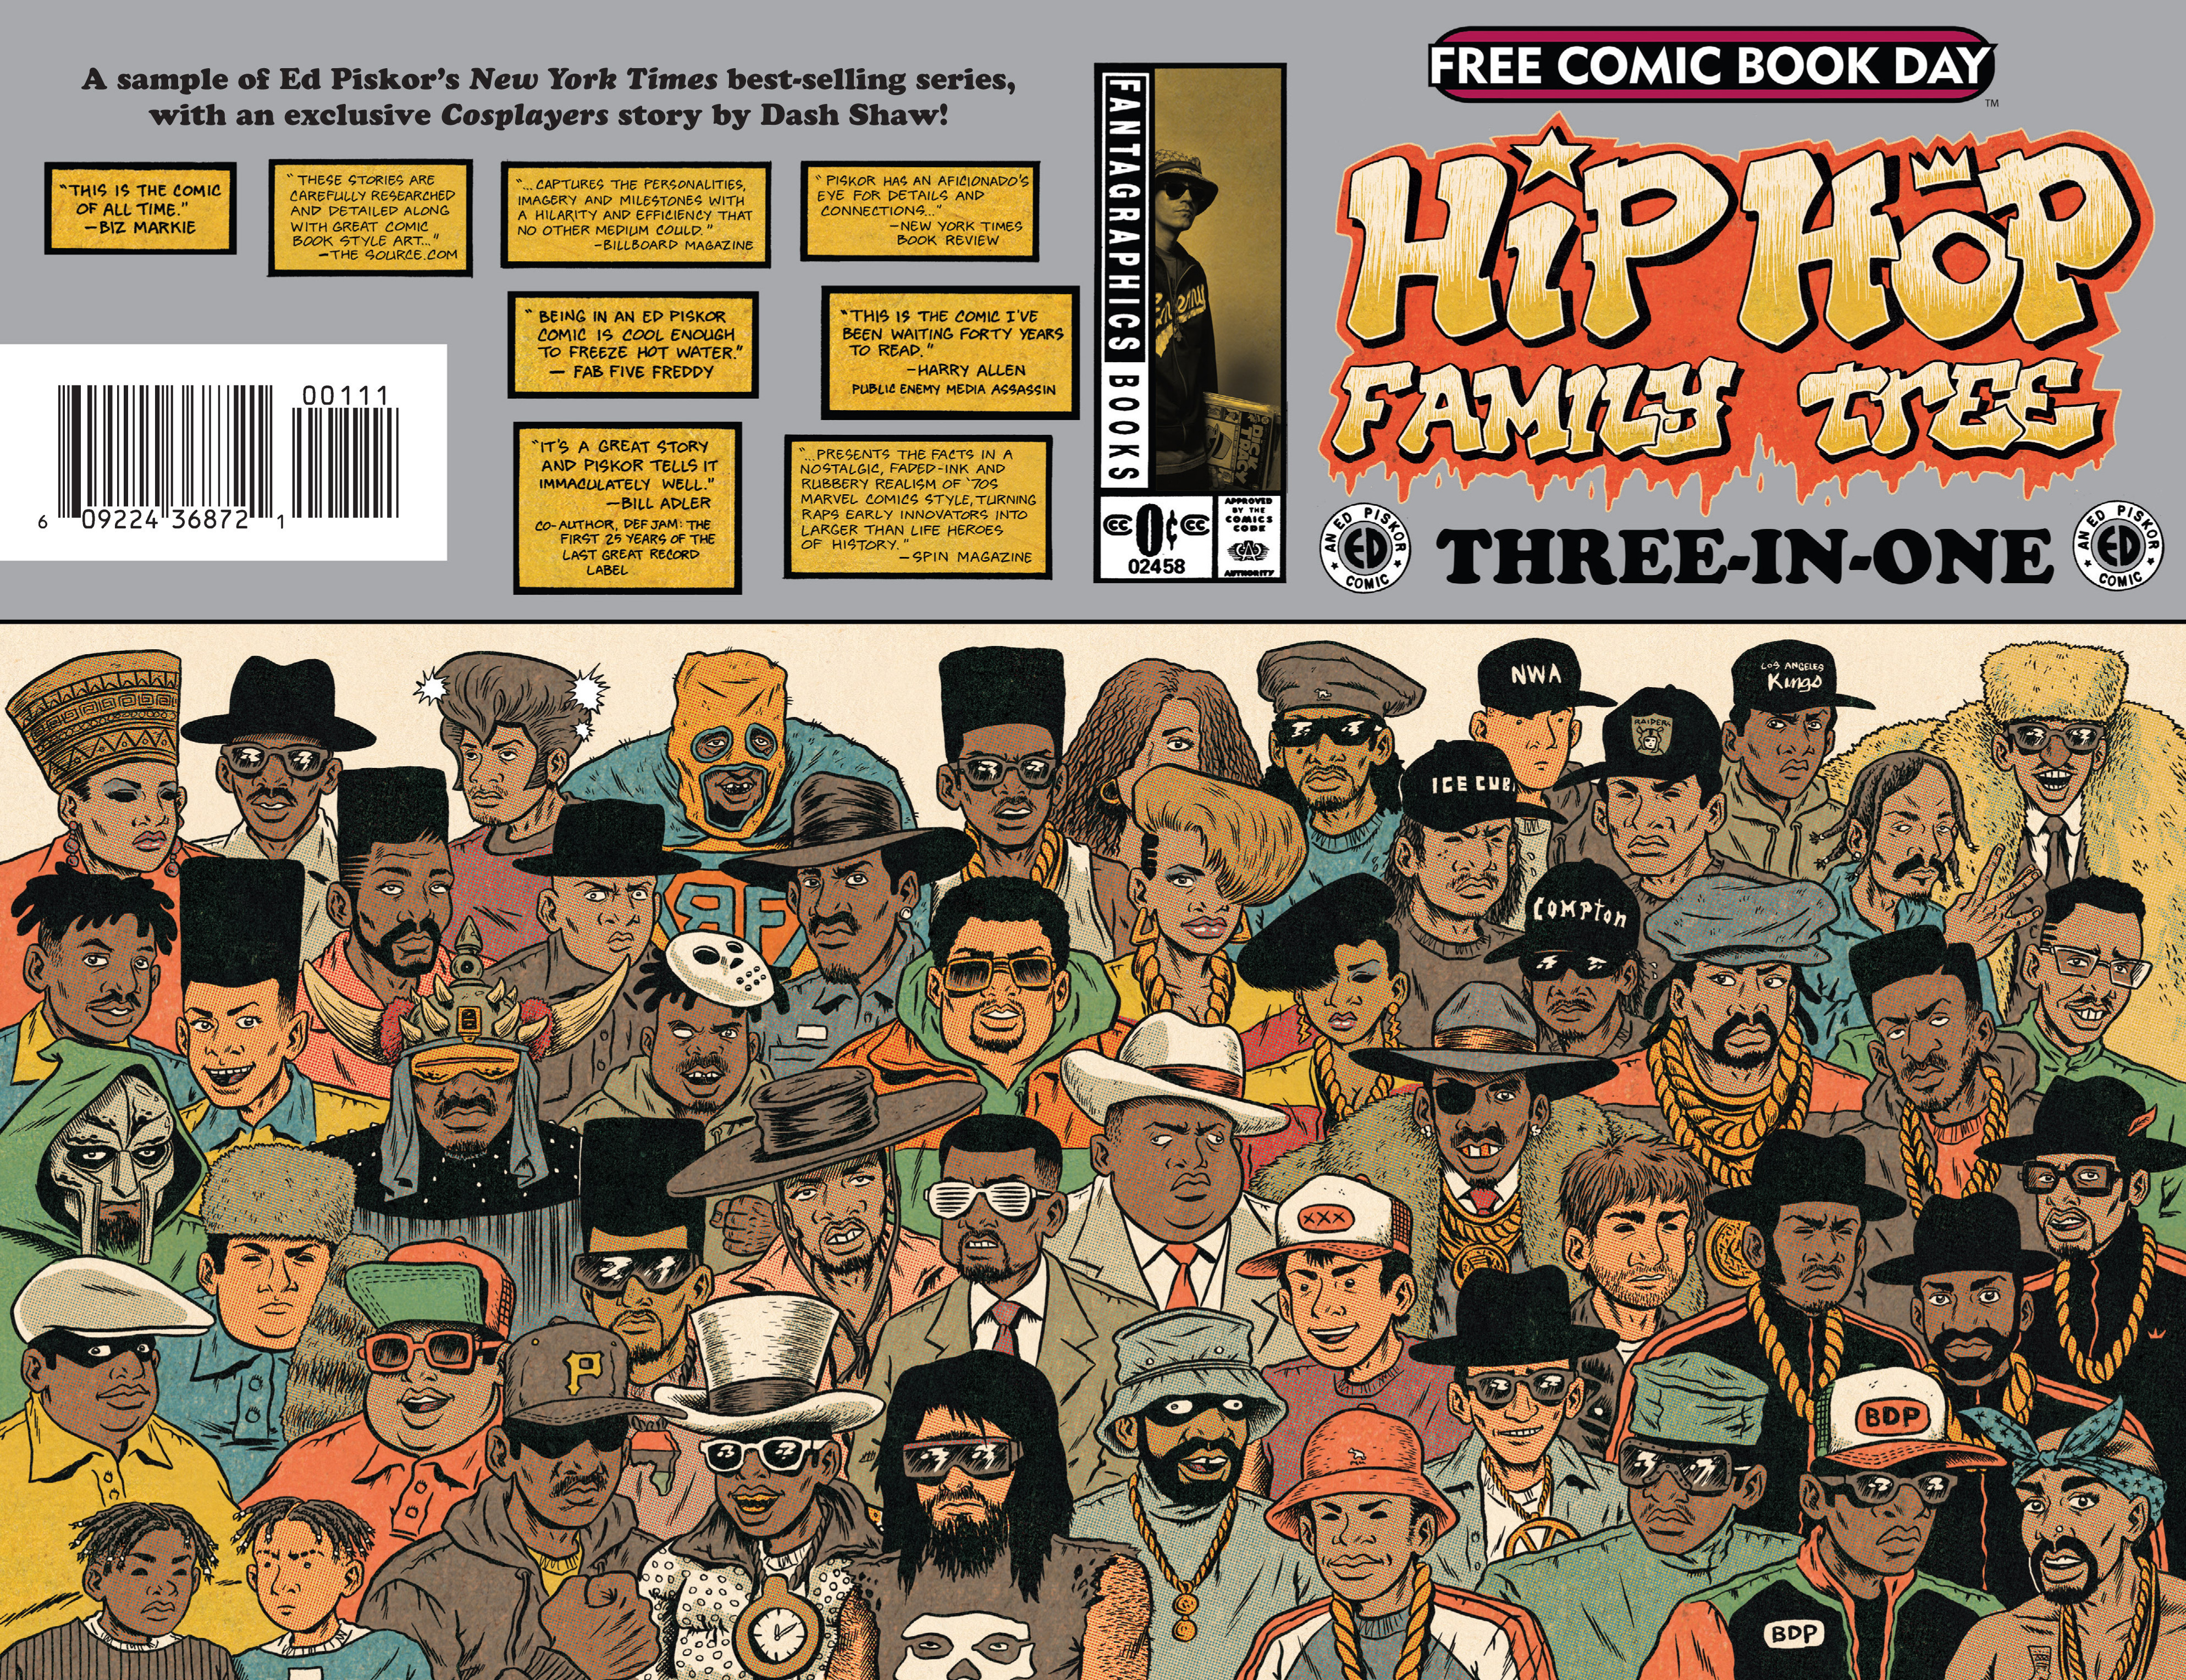 Read online Free Comic Book Day 2015 comic - Issue Hip Hop Family Tree Thre...